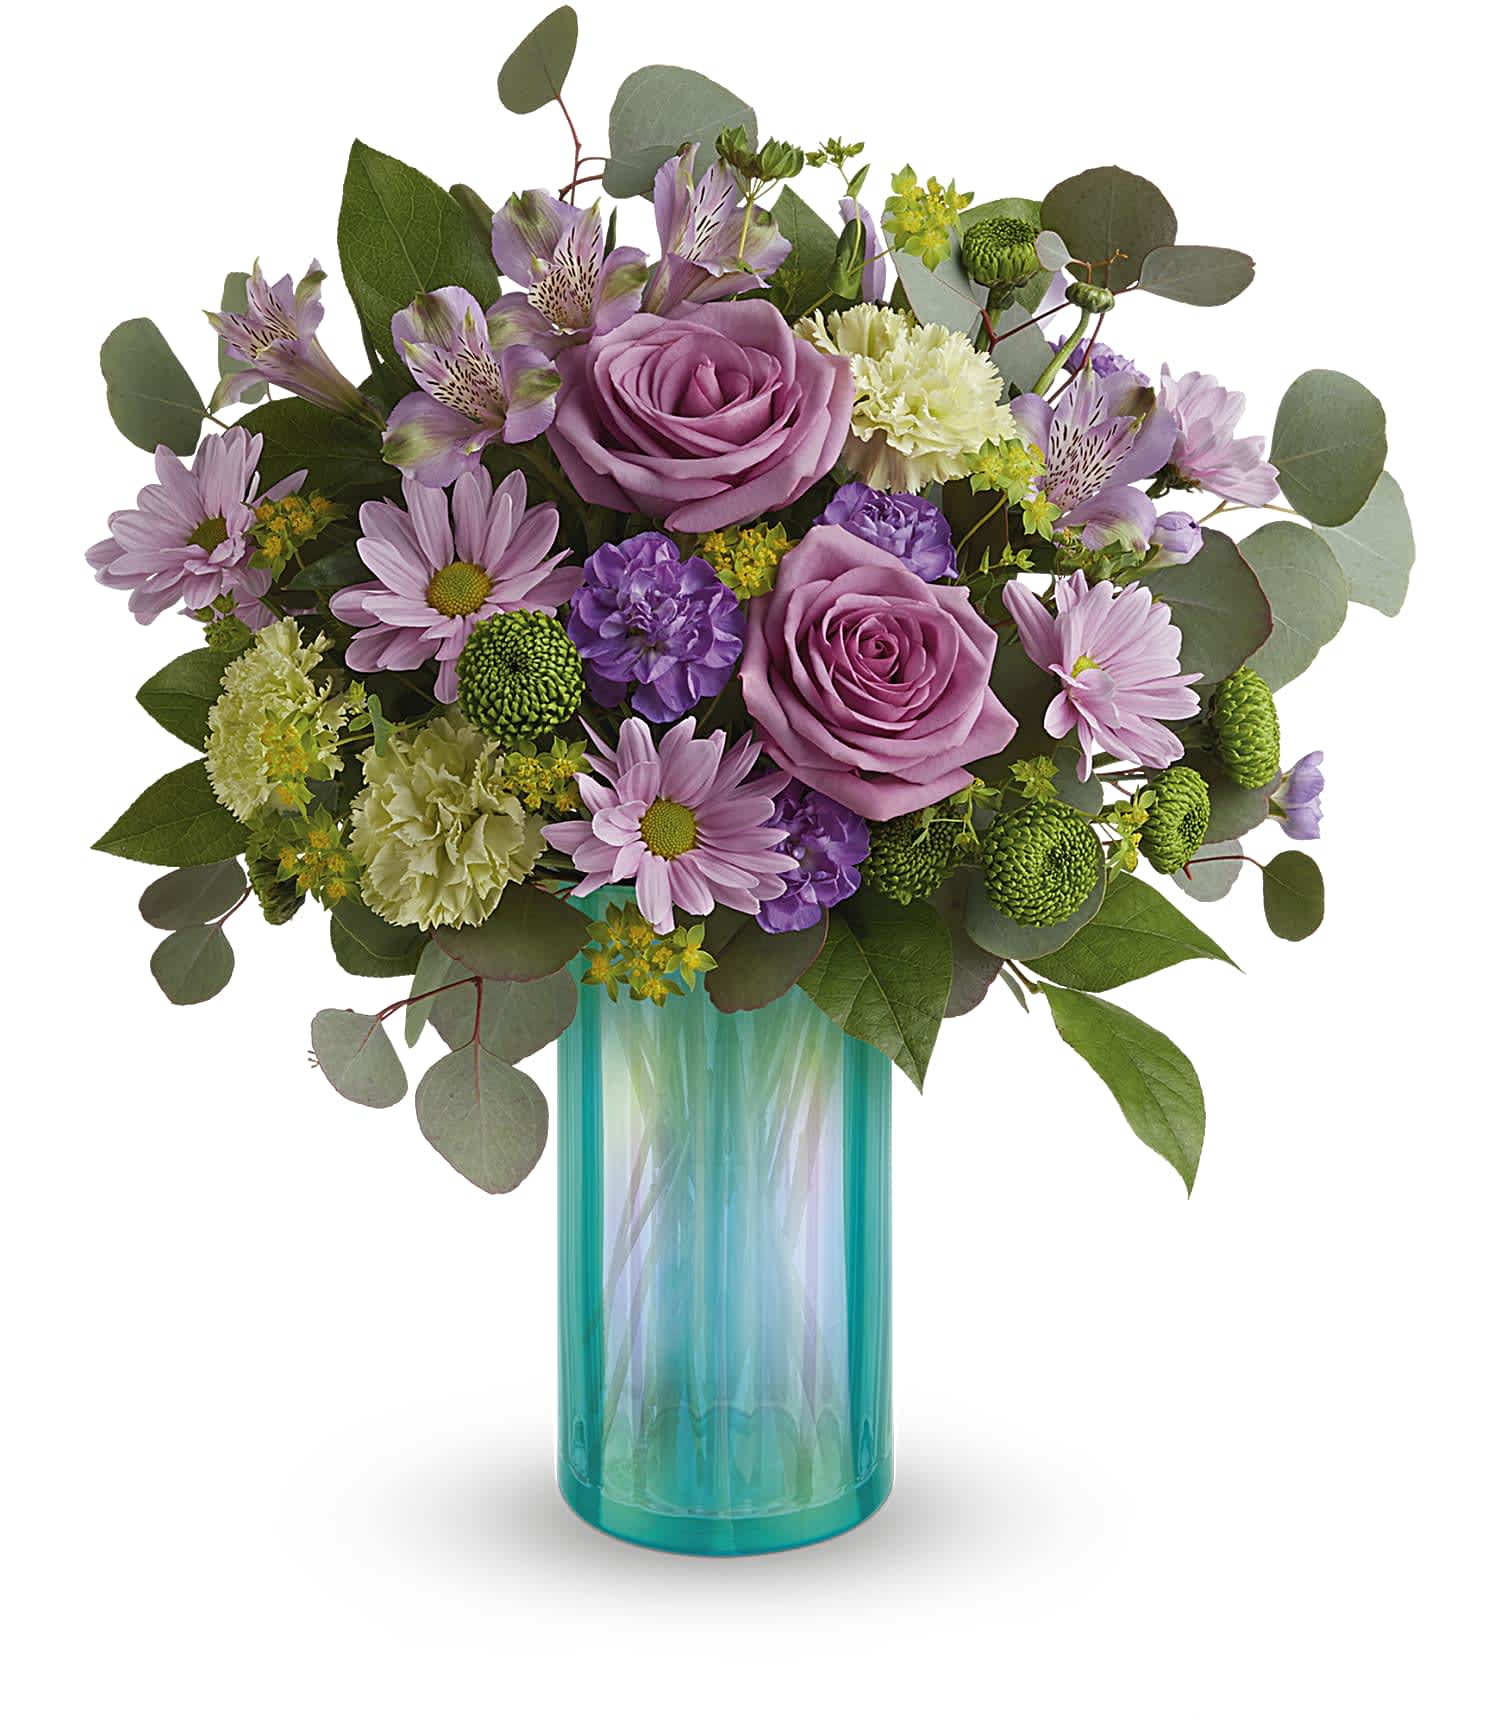 Iridescent Dream - Make all their spring dreams come true with this lush lavender and green bouquet, presented in breathtaking aqua glass with lustrous iridescent finish.